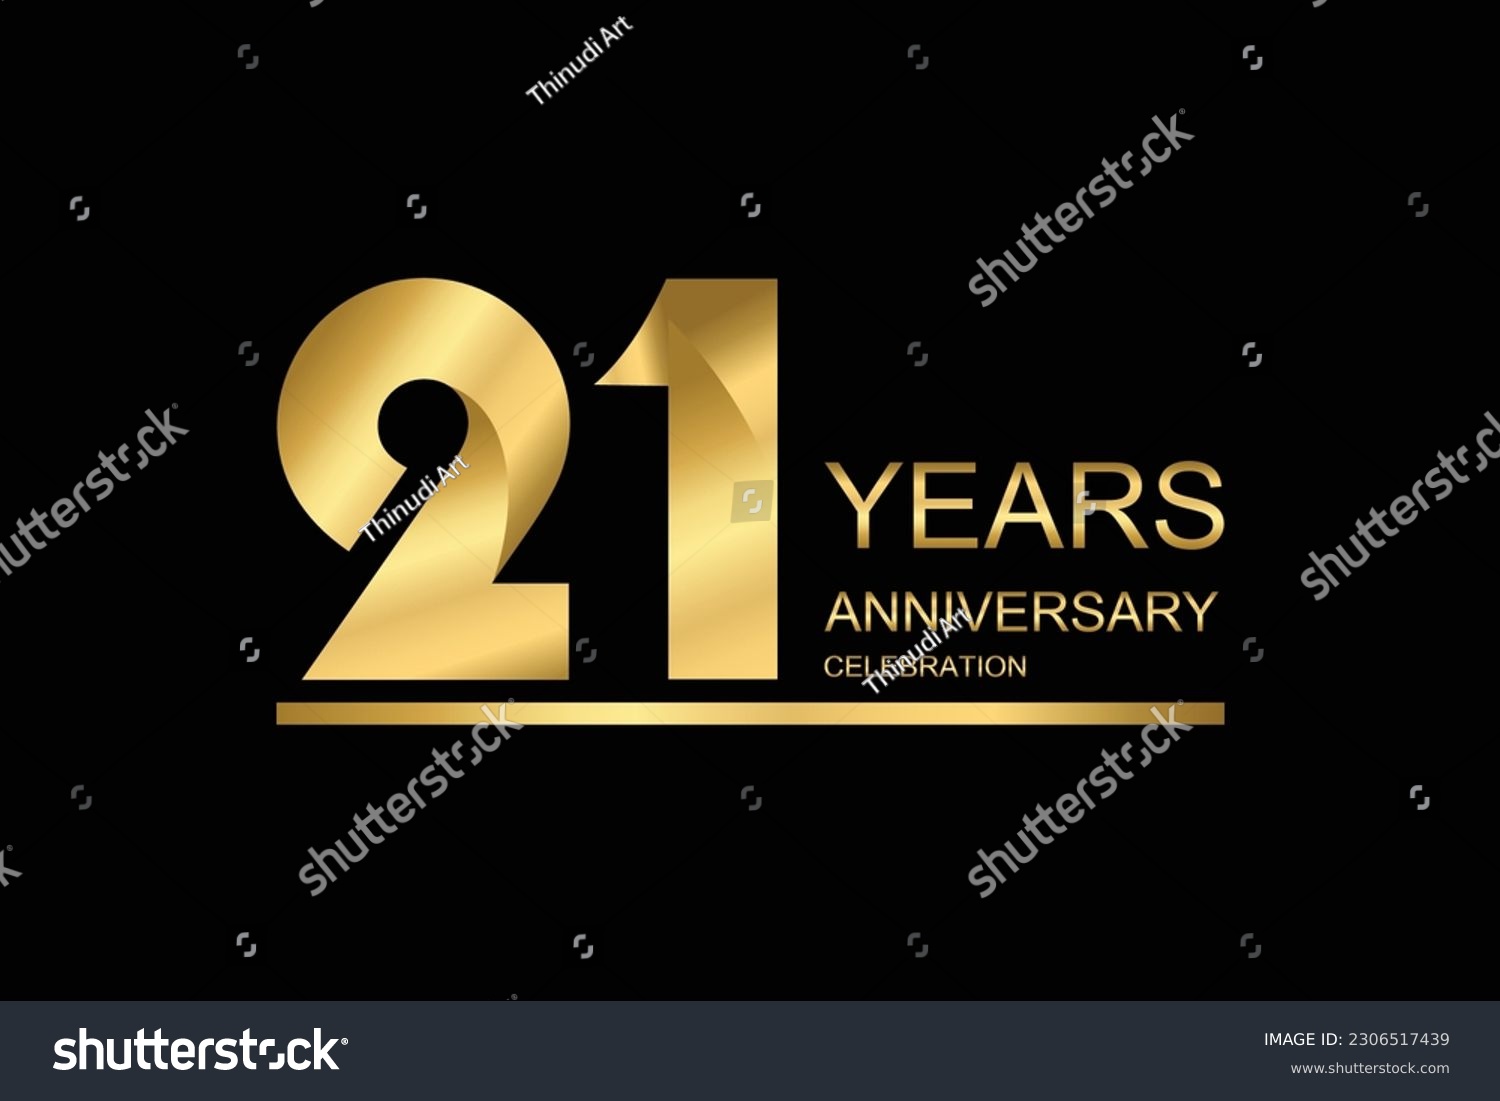 SVG of 21 year anniversary vector banner template. gold icon isolated on black background. svg